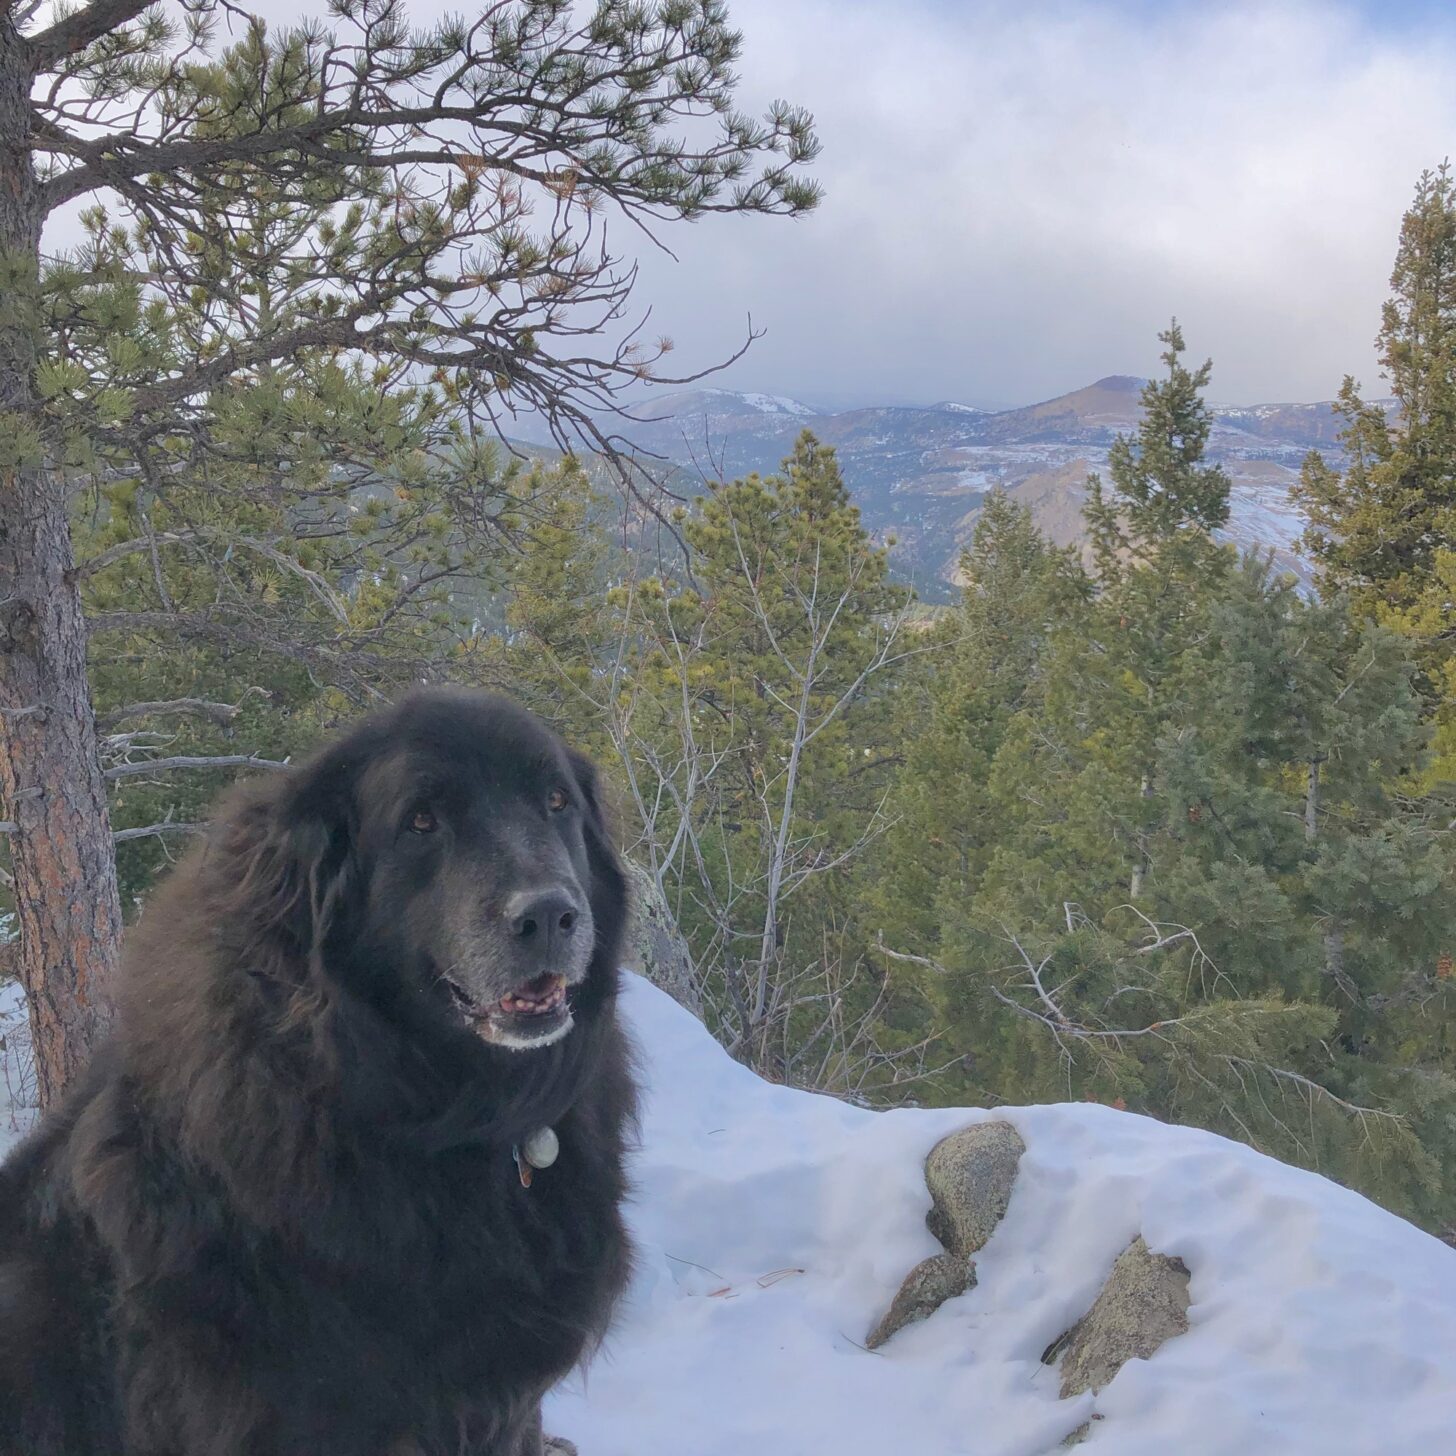 a shaggy black dog sits in the snow overlooking a vista.